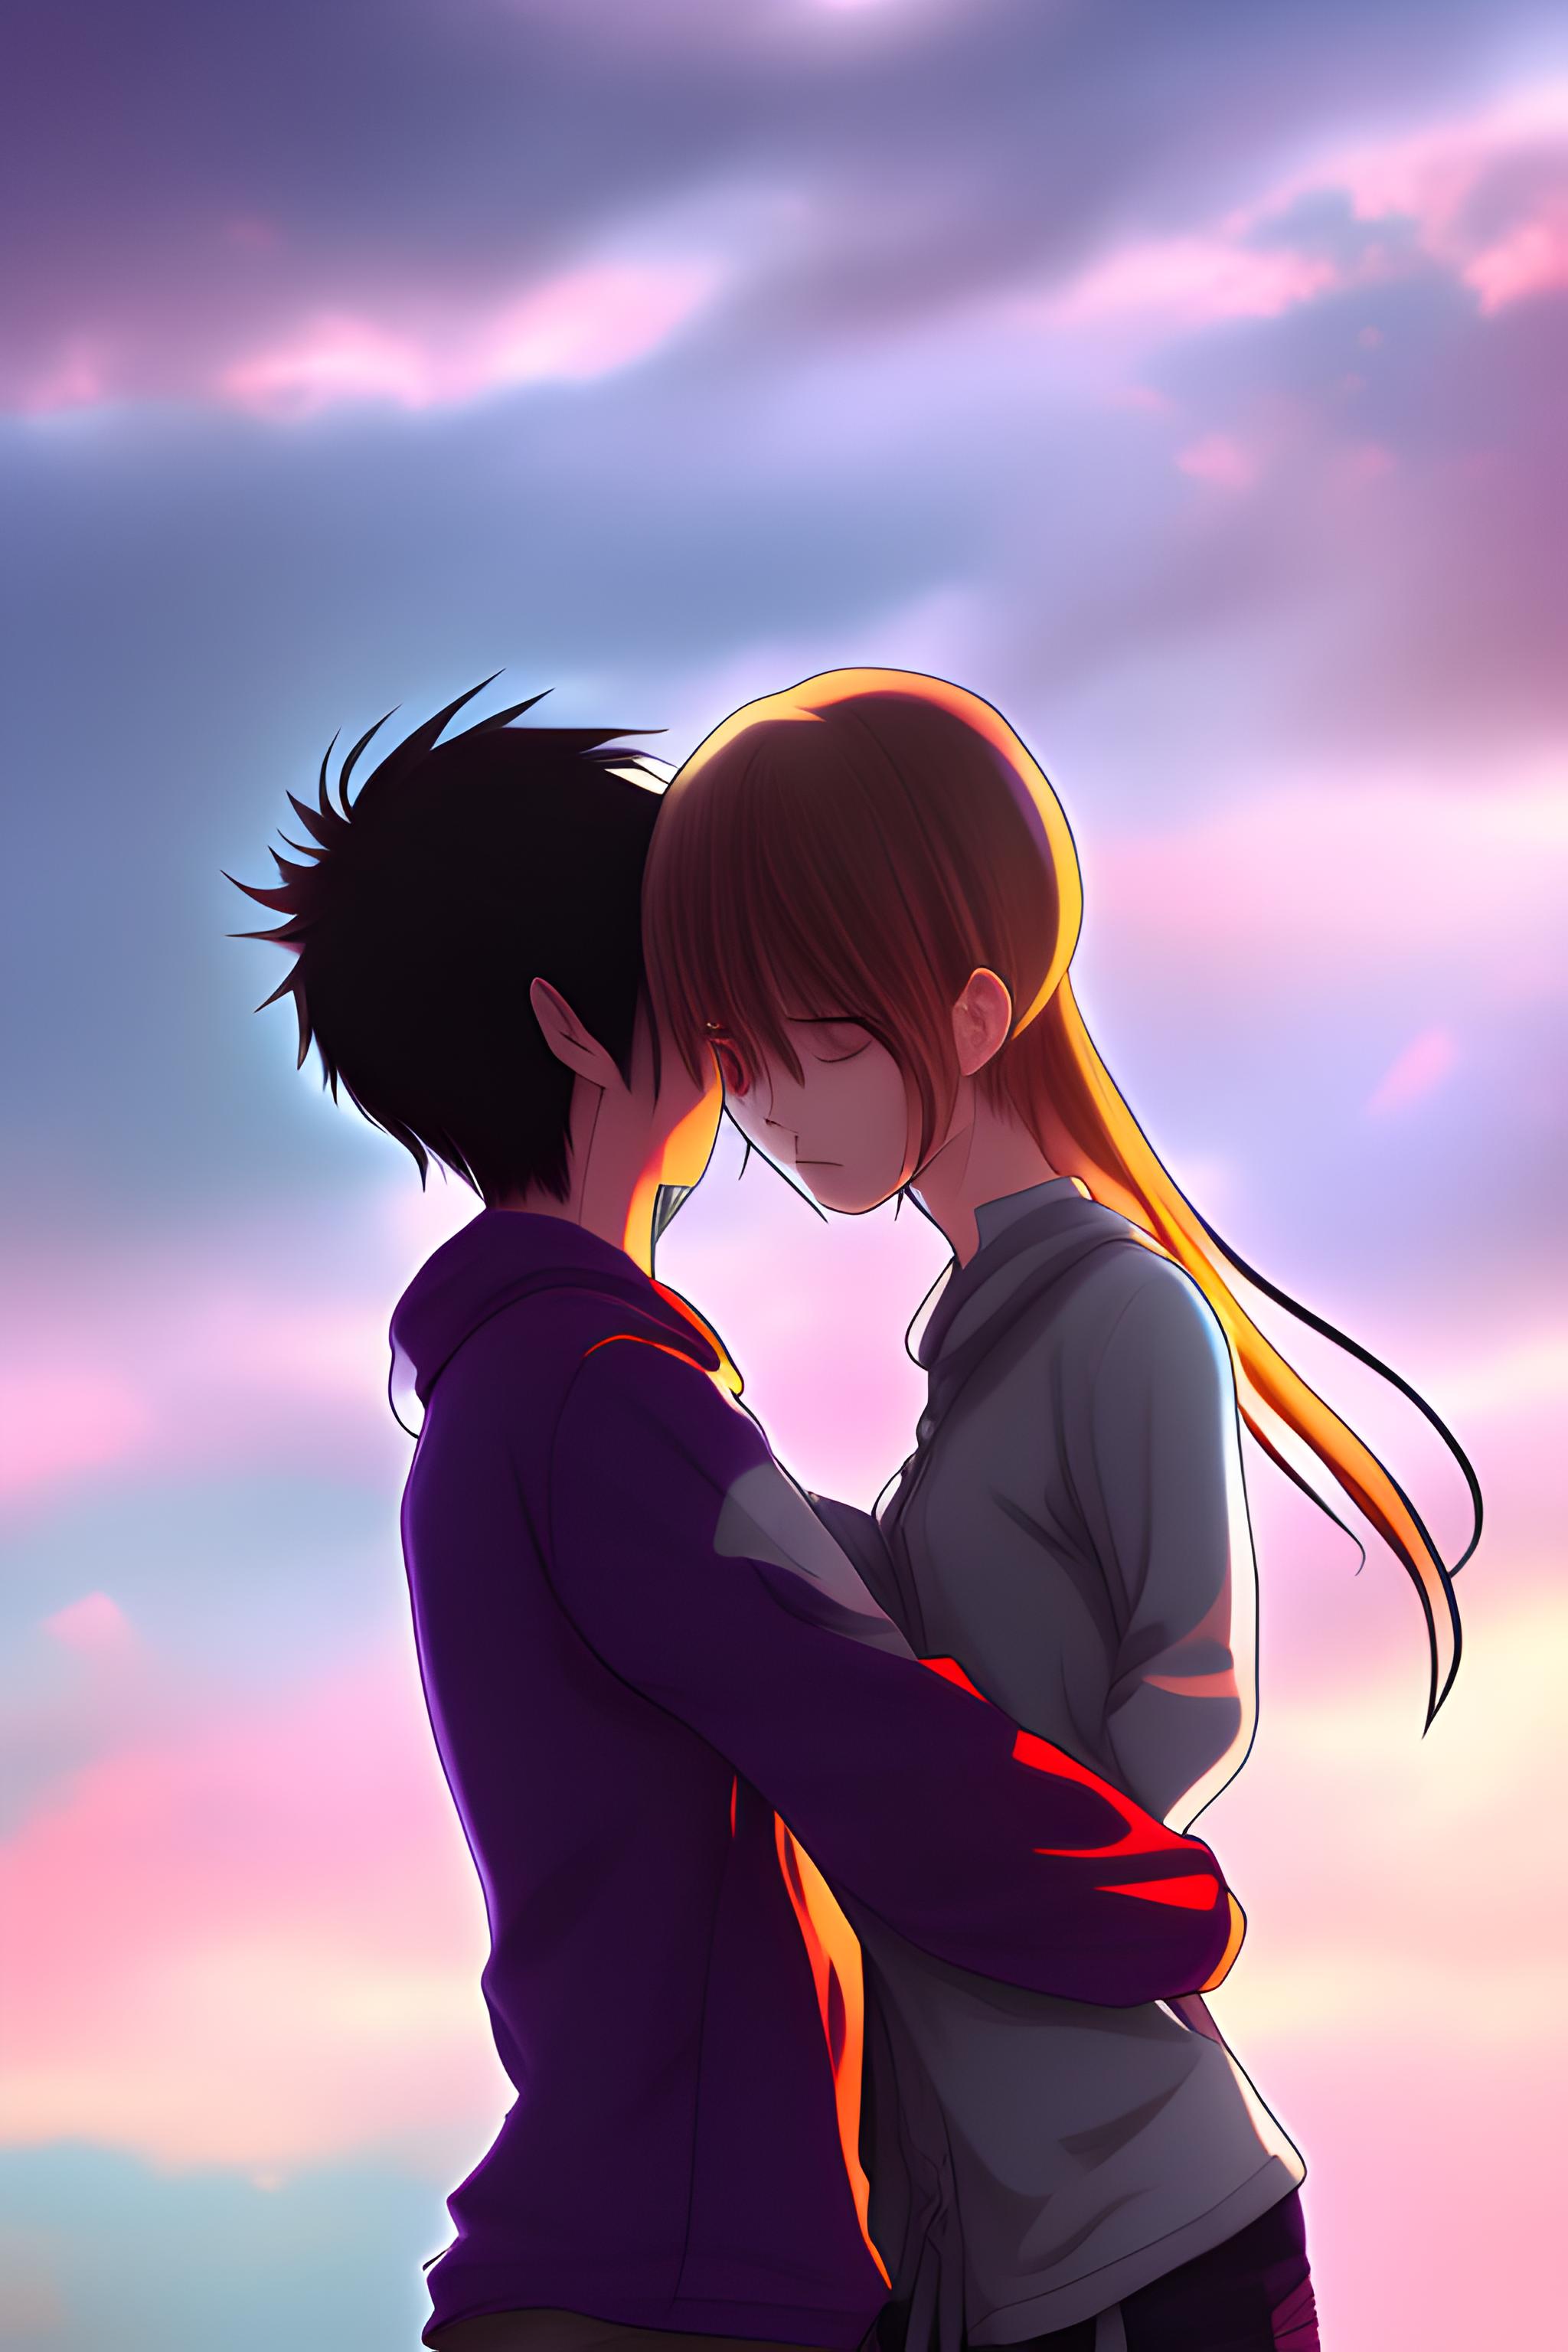 000000 803461493 kdpmpp2m15 PS7.5 Photo girl and boy anime in love hugging each other . digital art concept art [upscaled]